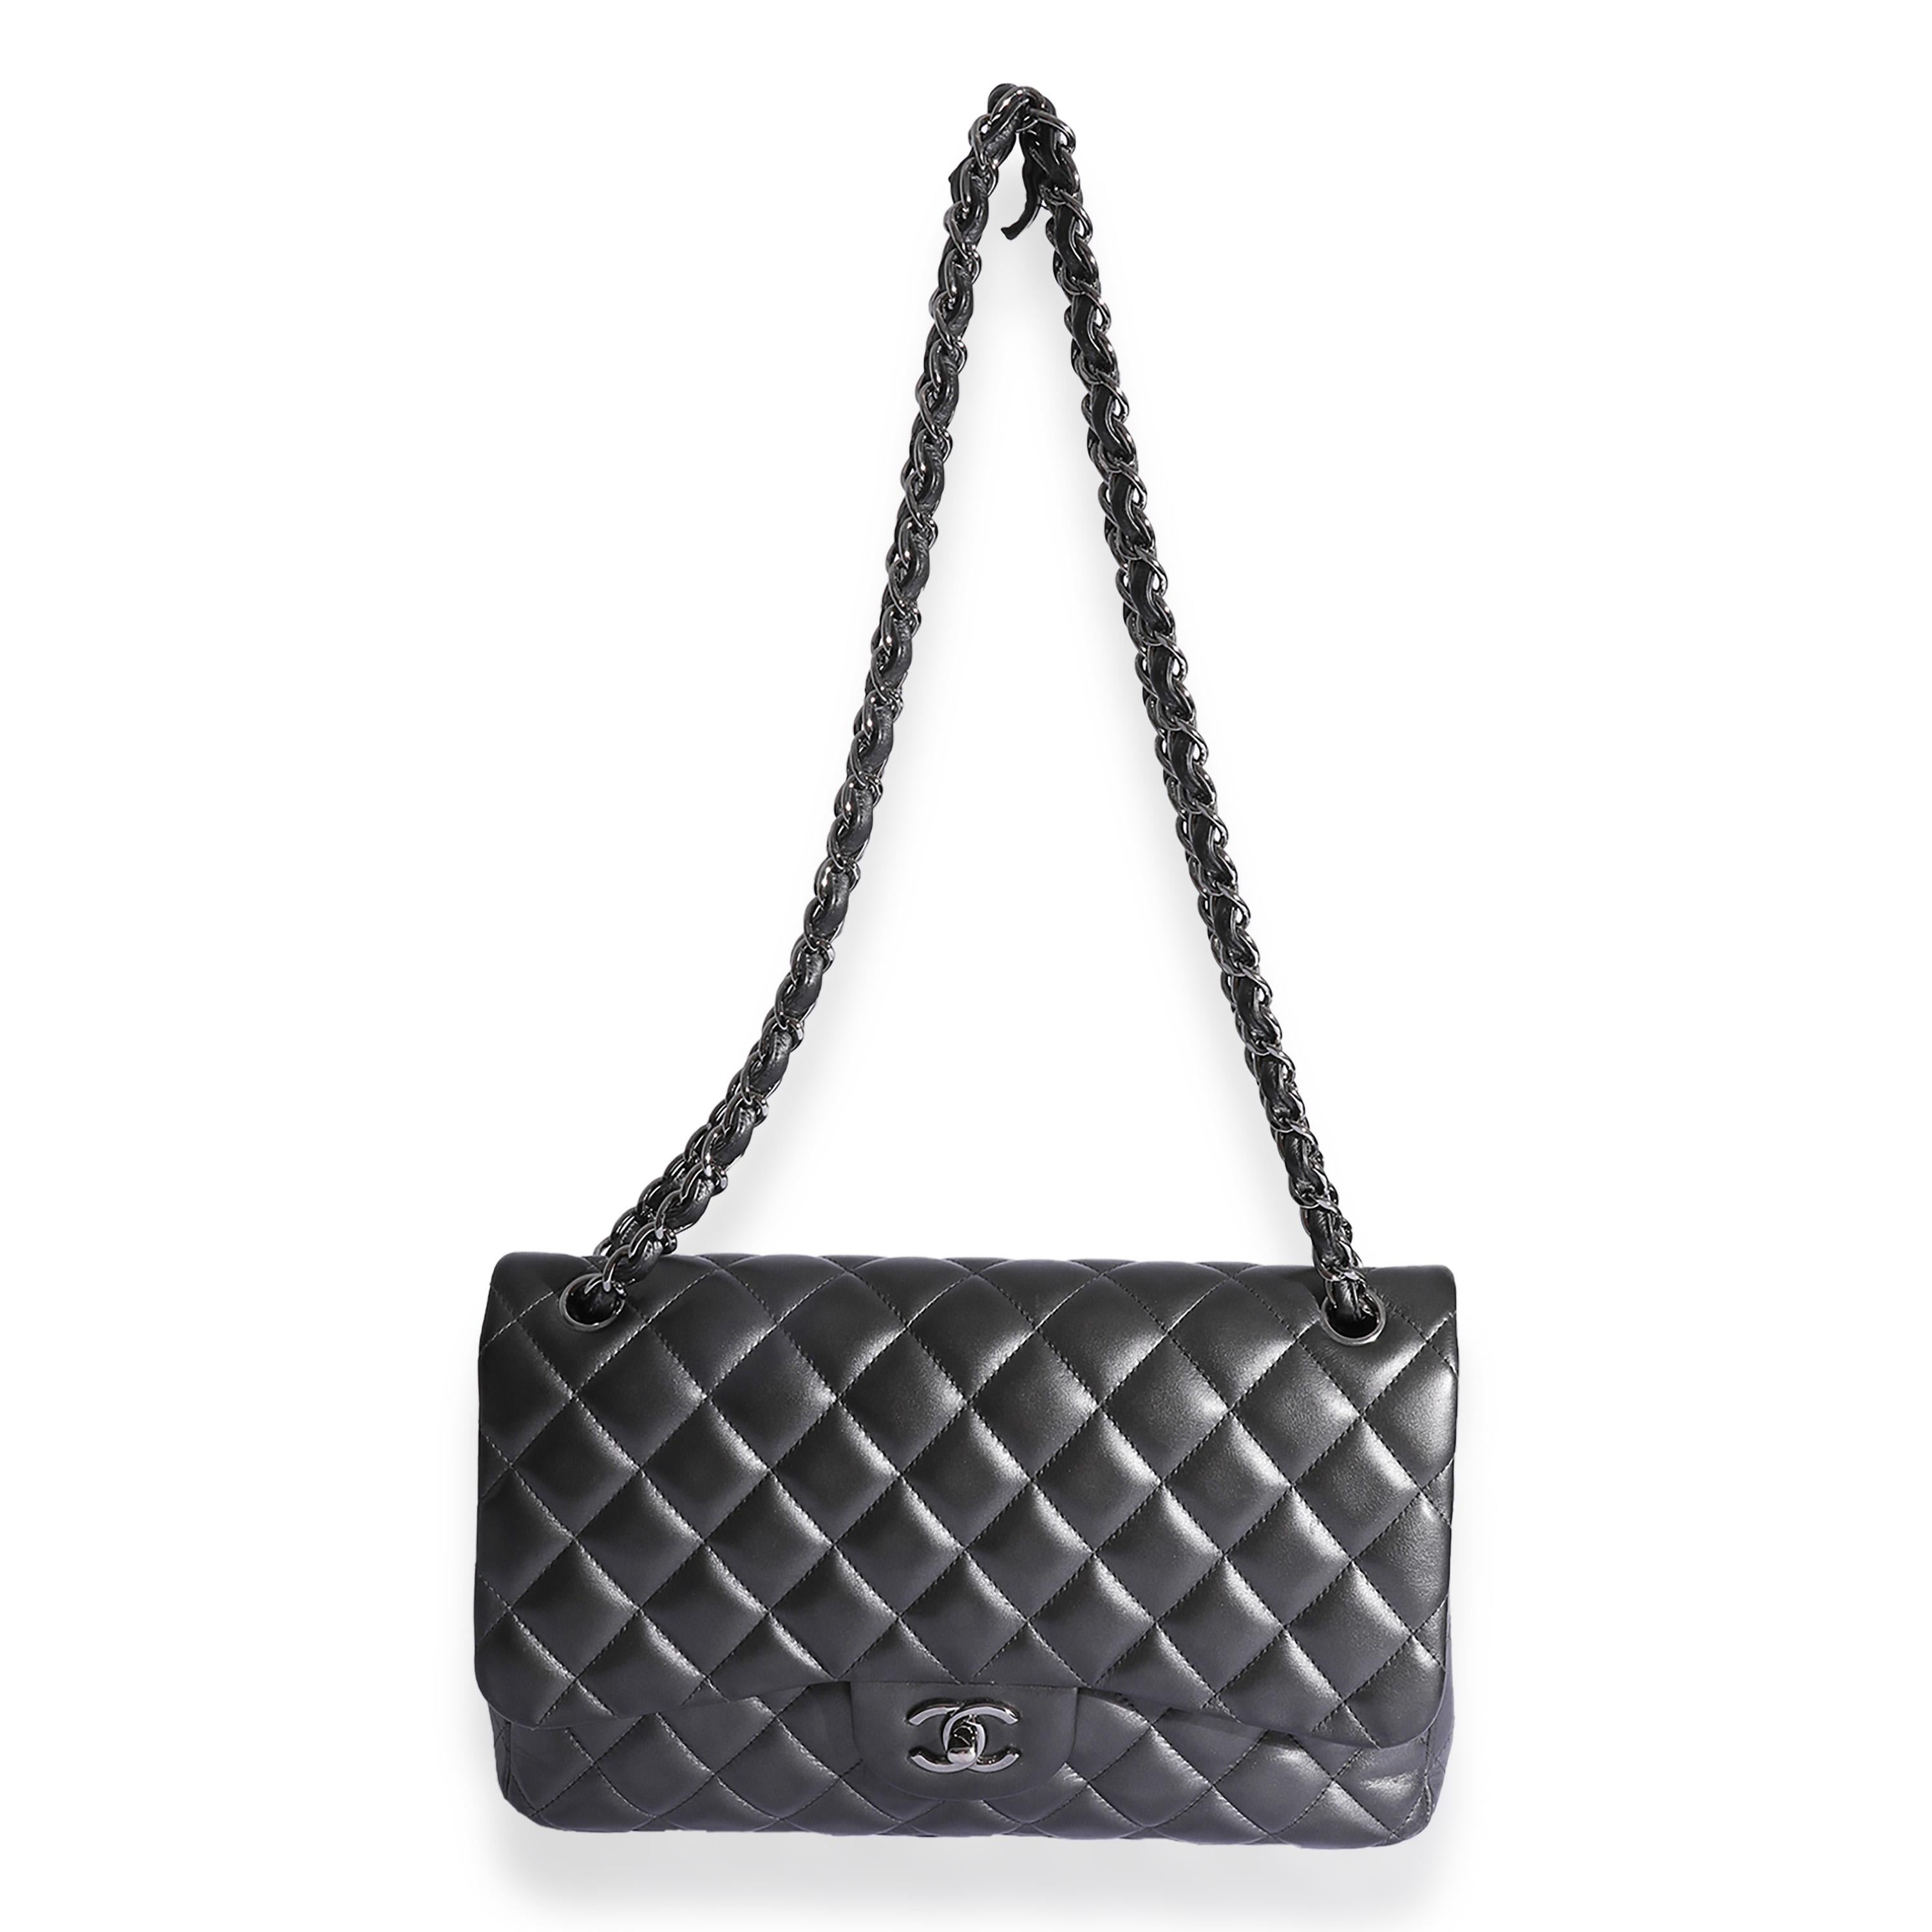 Listing Title: Chanel Metallic Gunmetal Quilted Lambskin Jumbo Double Flap Bag
SKU: 125304
Condition: Pre-owned 
Handbag Condition: Fair
Condition Comments: Fair Condition. Heavy scuffing at corners and throughout exterior. scratching at hardware.